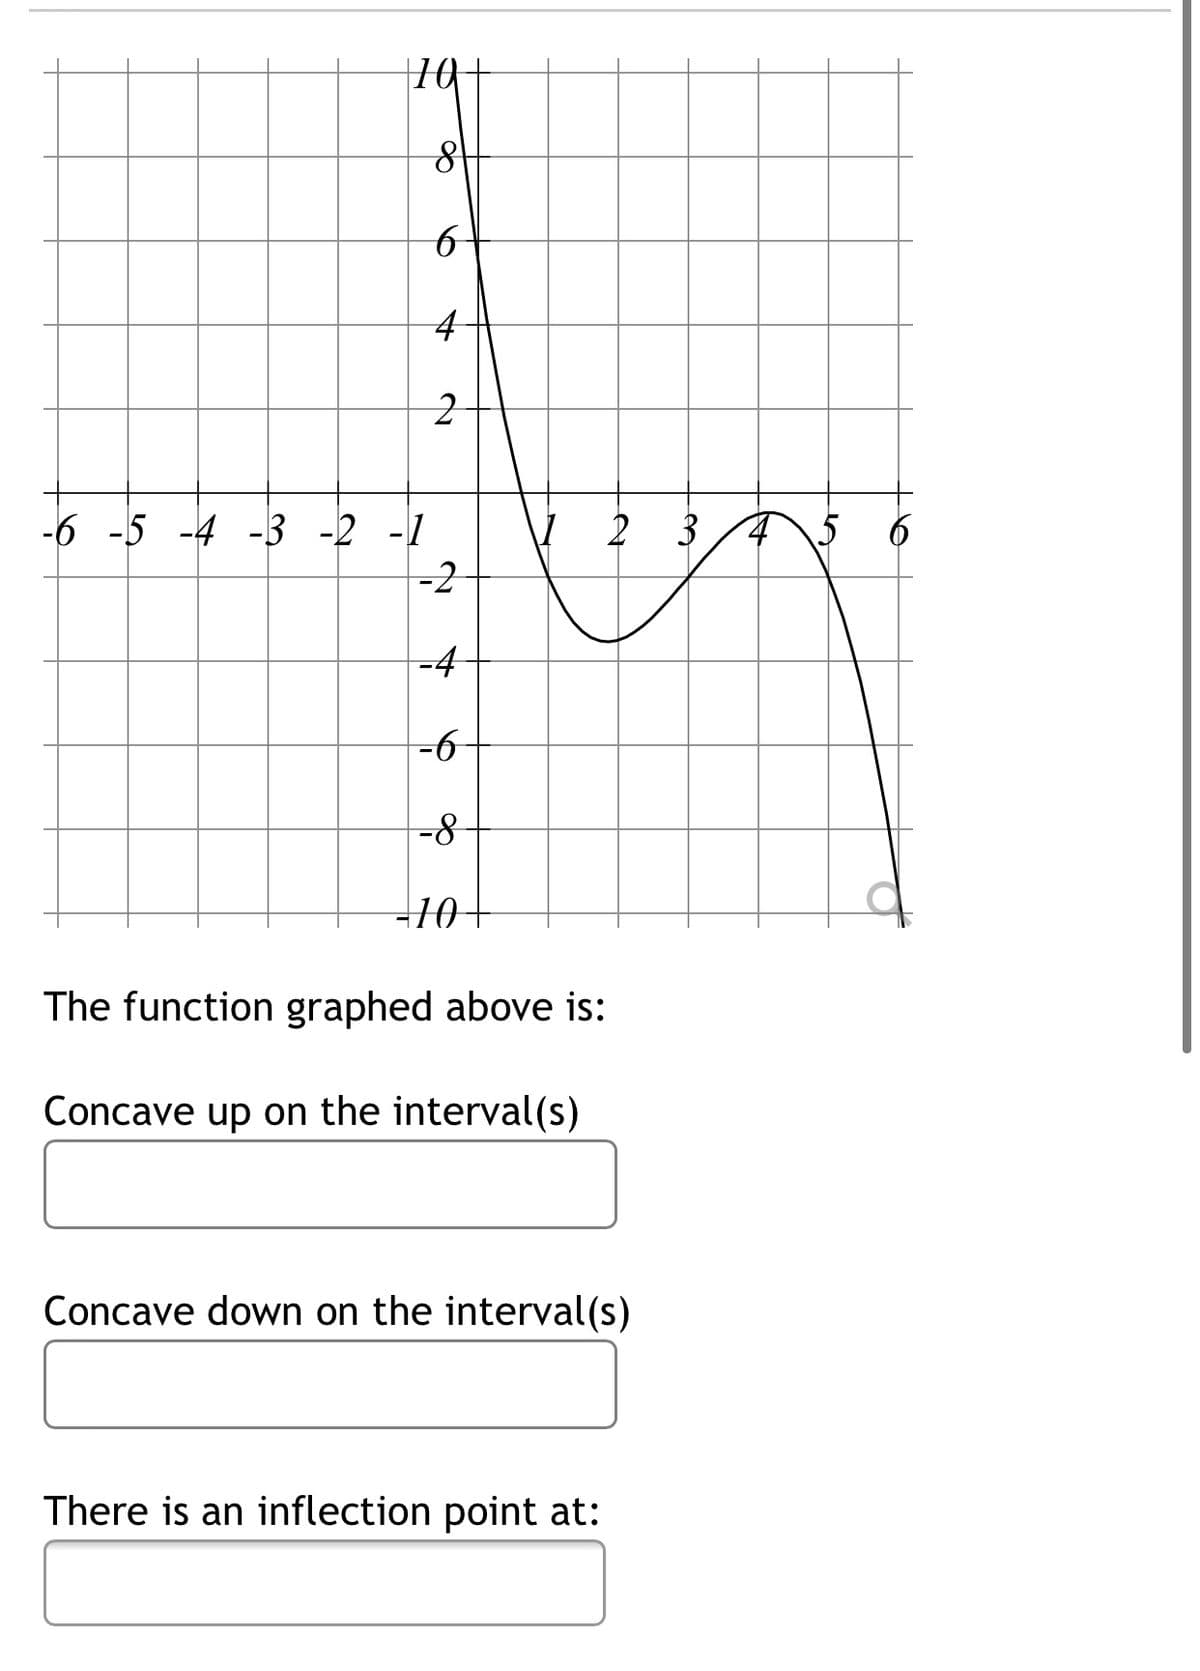 2 3
-6 -5 -4 -3 -2 -1
-2
-4
10
The function graphed above is:
Concave up on the interval(s)
Concave down on the interval(s)
There is an inflection point at:
